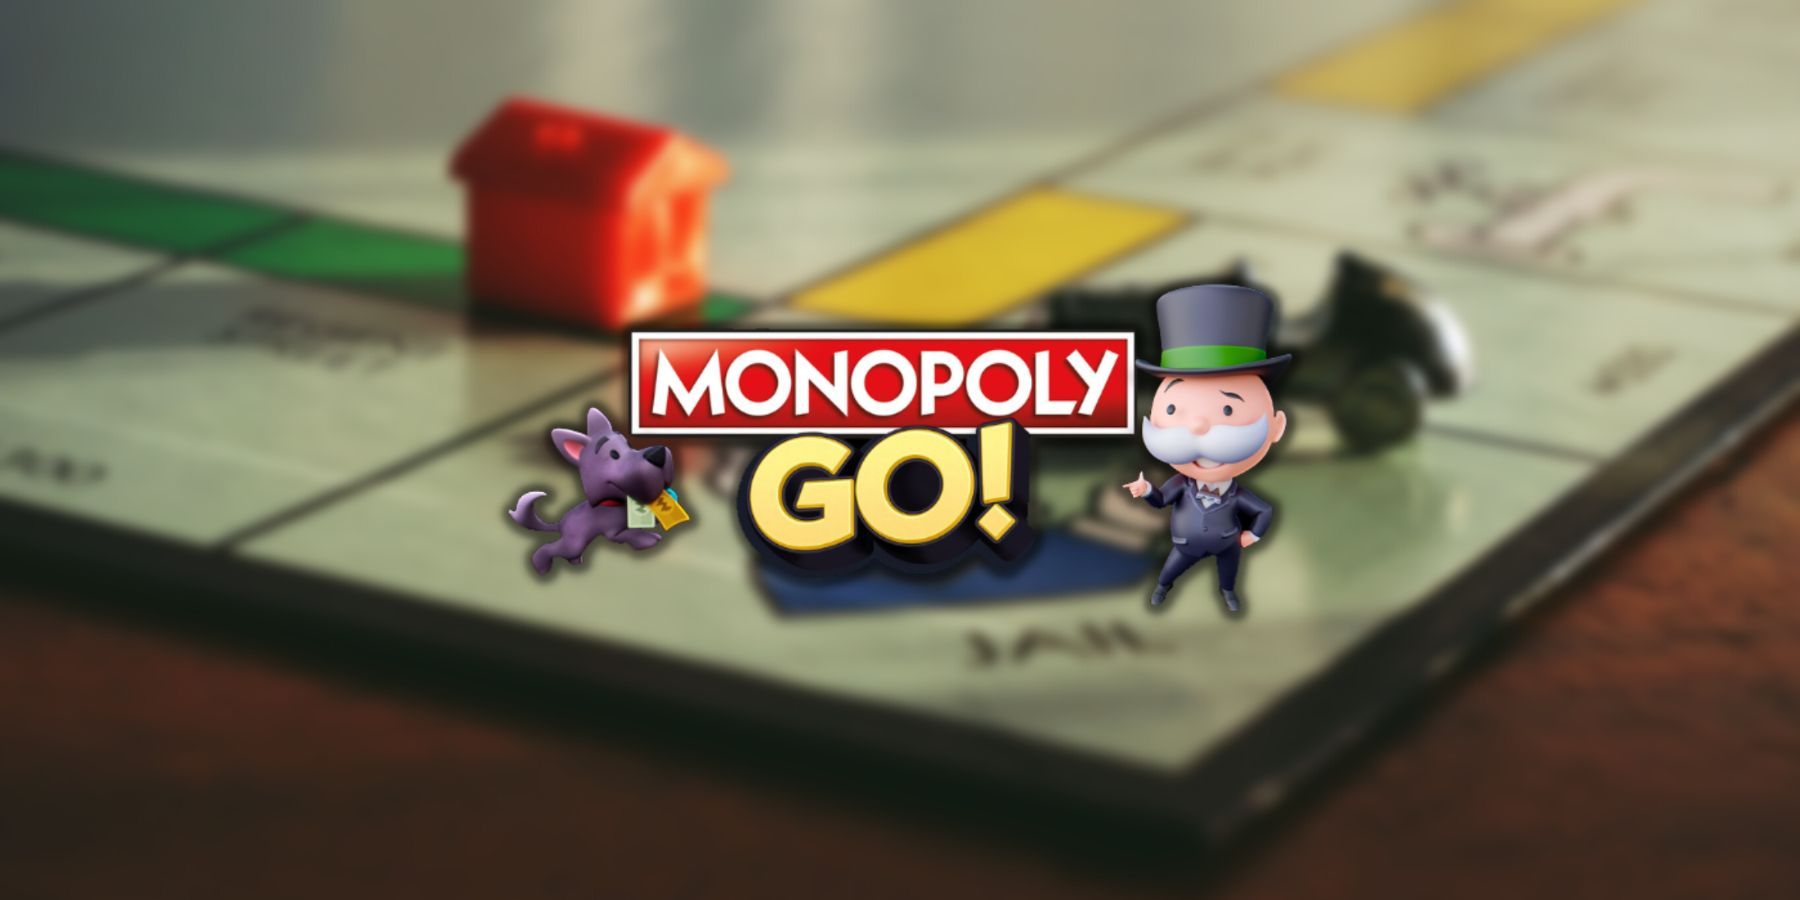 The Monopoly GO logo with a Monopoly board in the background